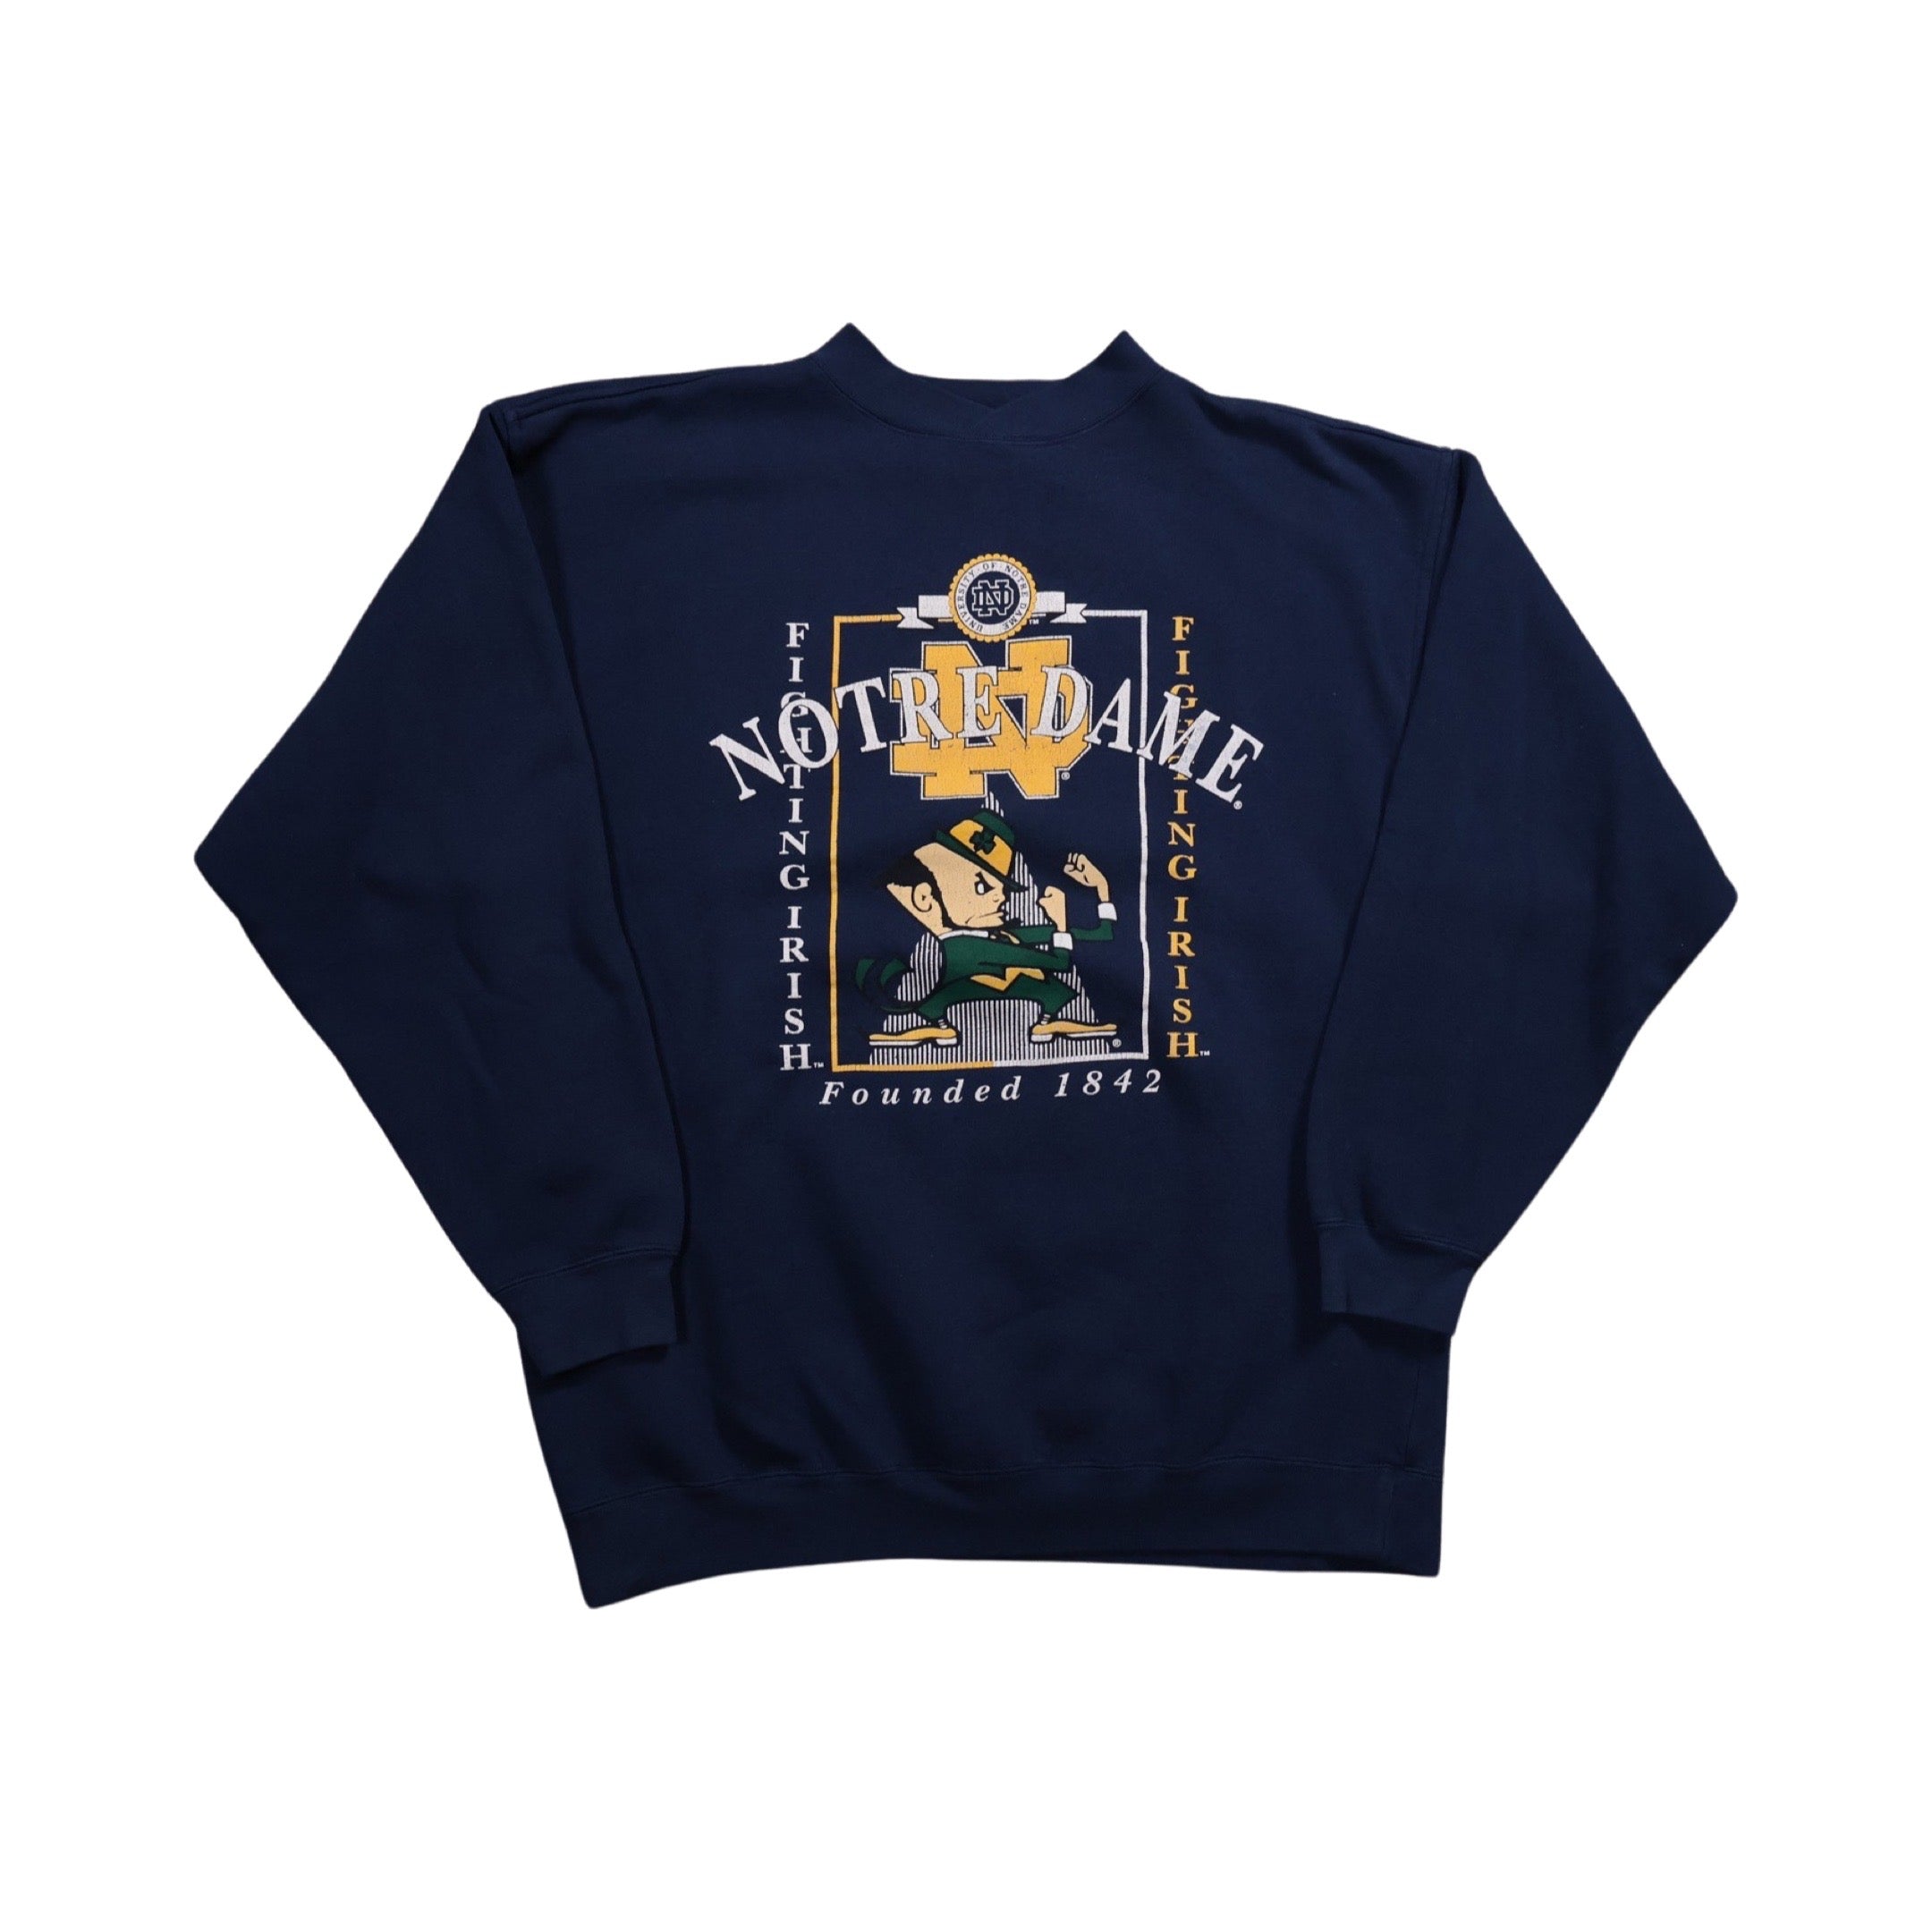 Notre Dame 90s Sweater (XL)